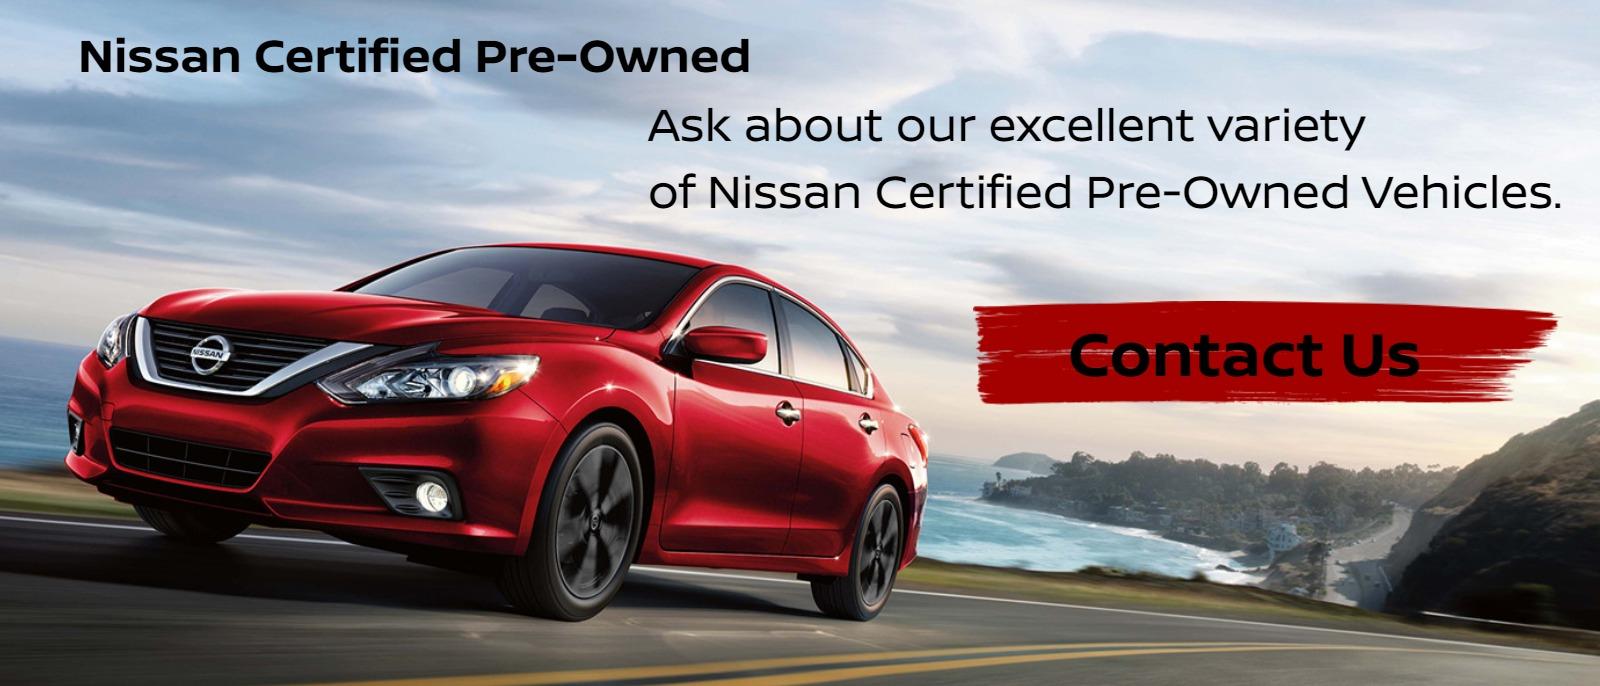 Nissan CPO
Ask about our excellent variety of Nissan Certified Pre-Owned Vehicles.